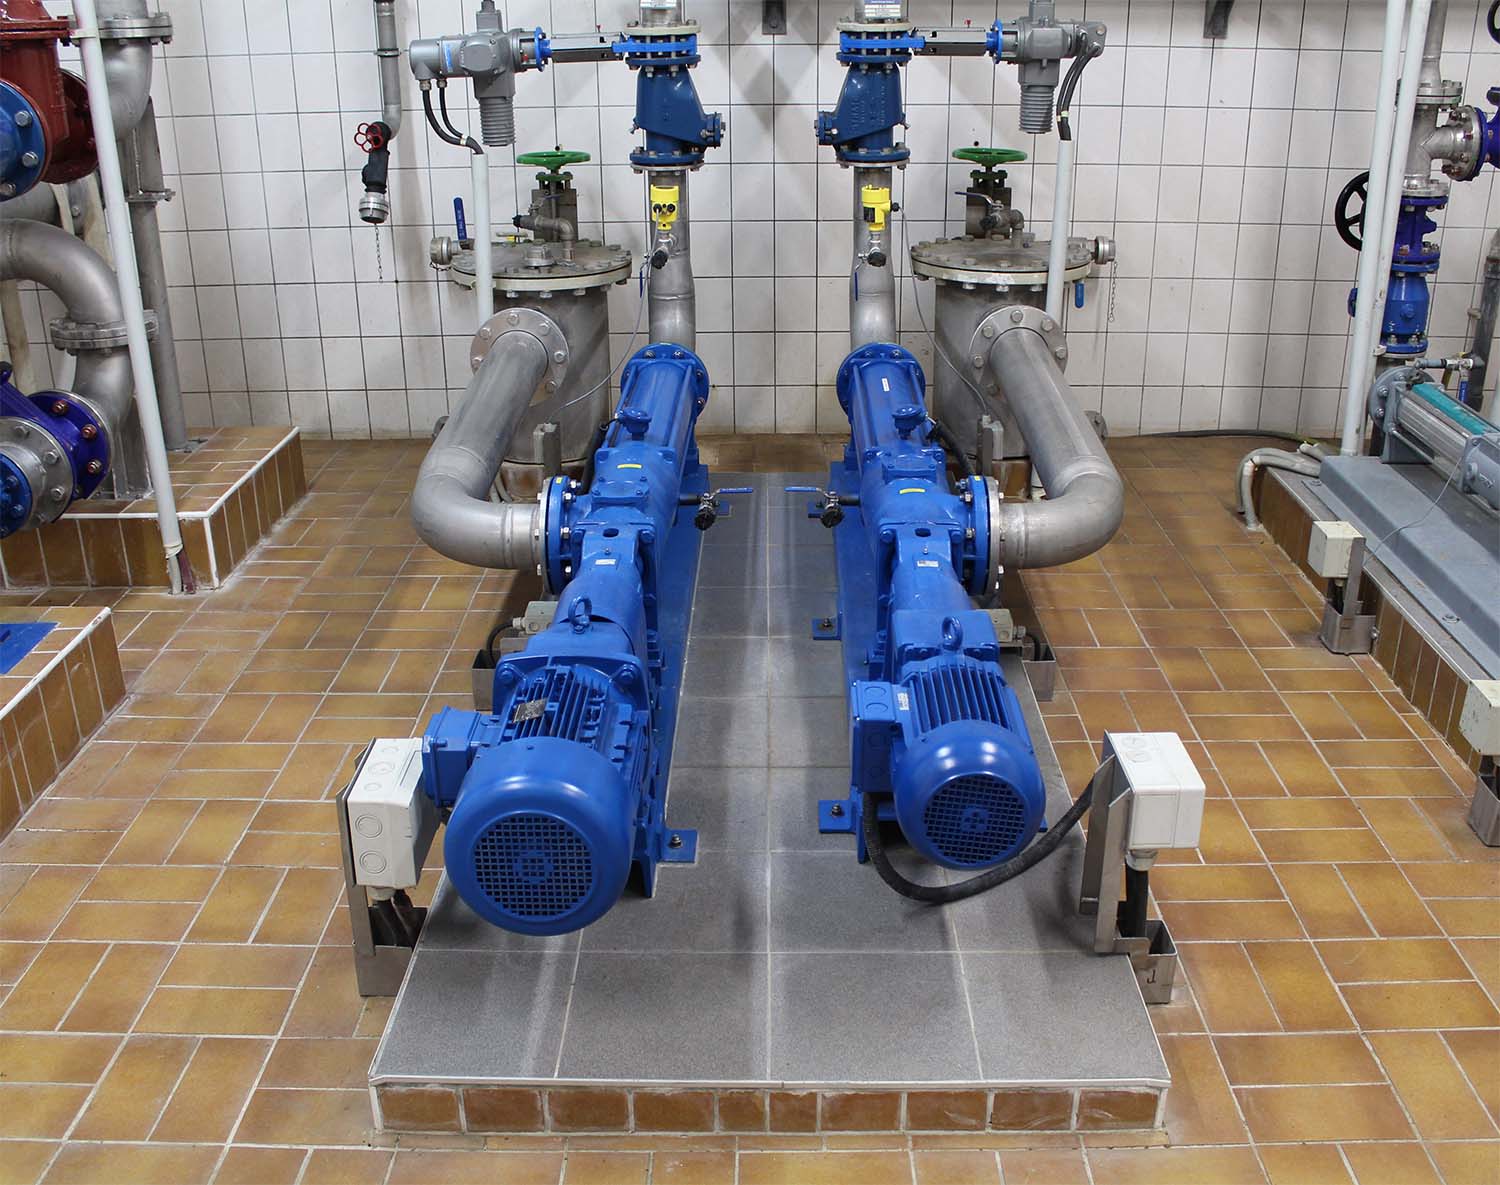 Bauer Gear Motor has collaborated with Allweiler, combining highly efficient permanent magnet synchronous motors (PMSMs) with Allweiler progressive cavity pumps, at Stendal wastewater treatment plant in Germany.